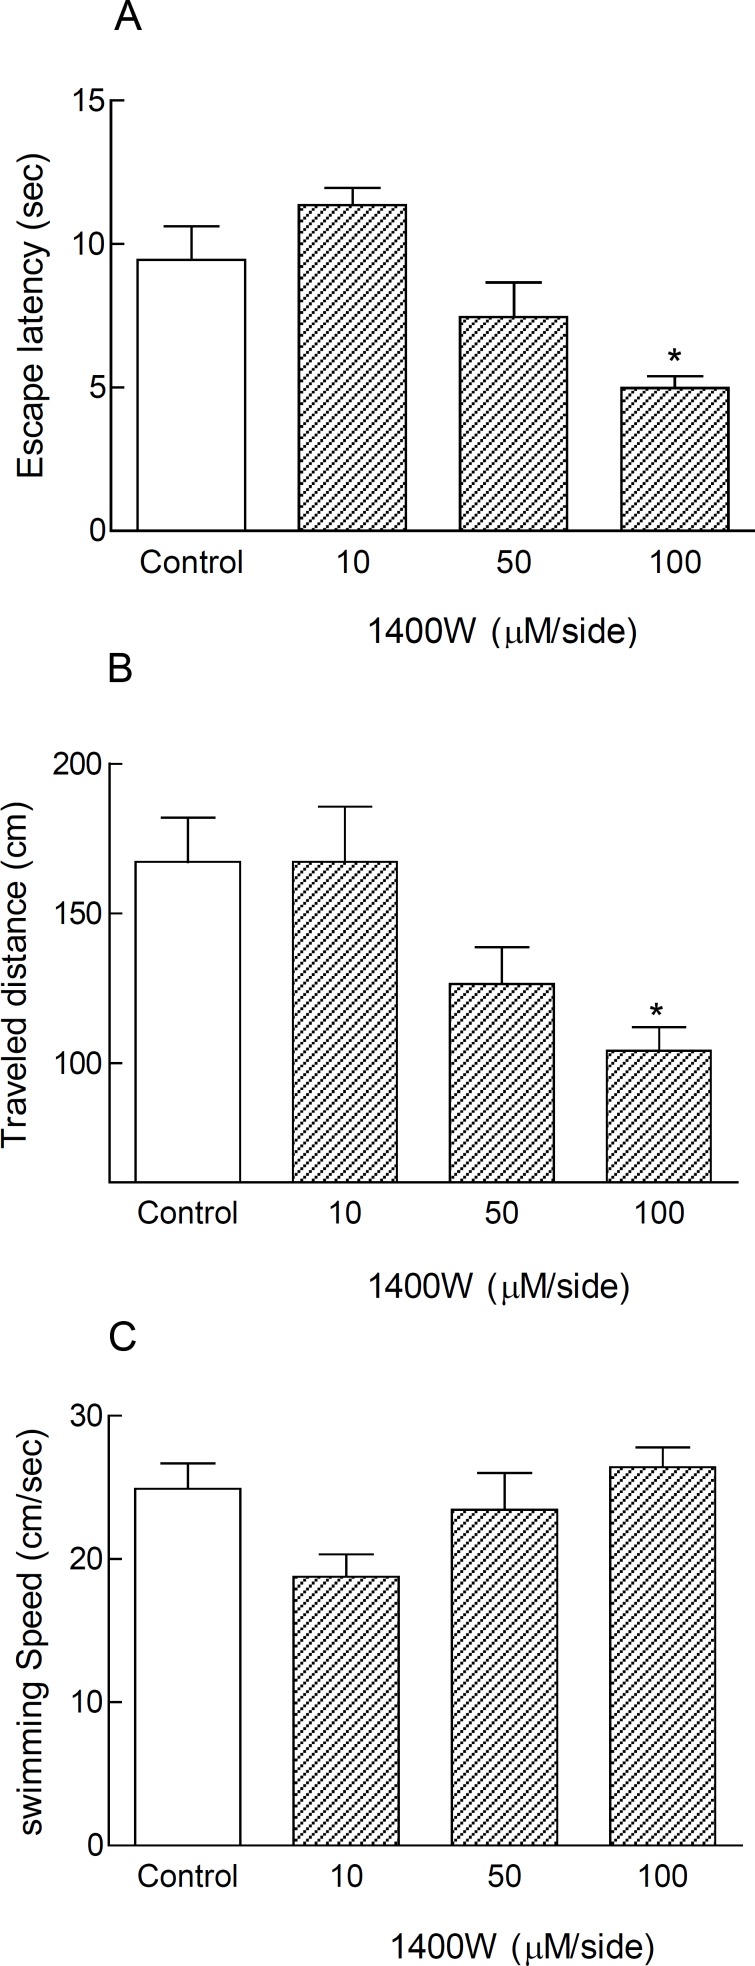 Treatment with 1400W as a selective iNOS inhibitor caused spatial memory improvement in cannulated non-anesthetized animals in MWM during testing trials. Inhibition of inducible nitric oxide synthase by bilateral intra-hippocampal infusion of 1400W (100 μM/side) via cannulas after surgical recovery, led to significant decrease in escape latency and traveled distance (*p < 0.05) in comparison with control group (Figures 1A and B). The swimming speed did not change significantly in all treated animals (Figures 1C). Each bar graph shows Mean ± SEM for 8 animals in each group